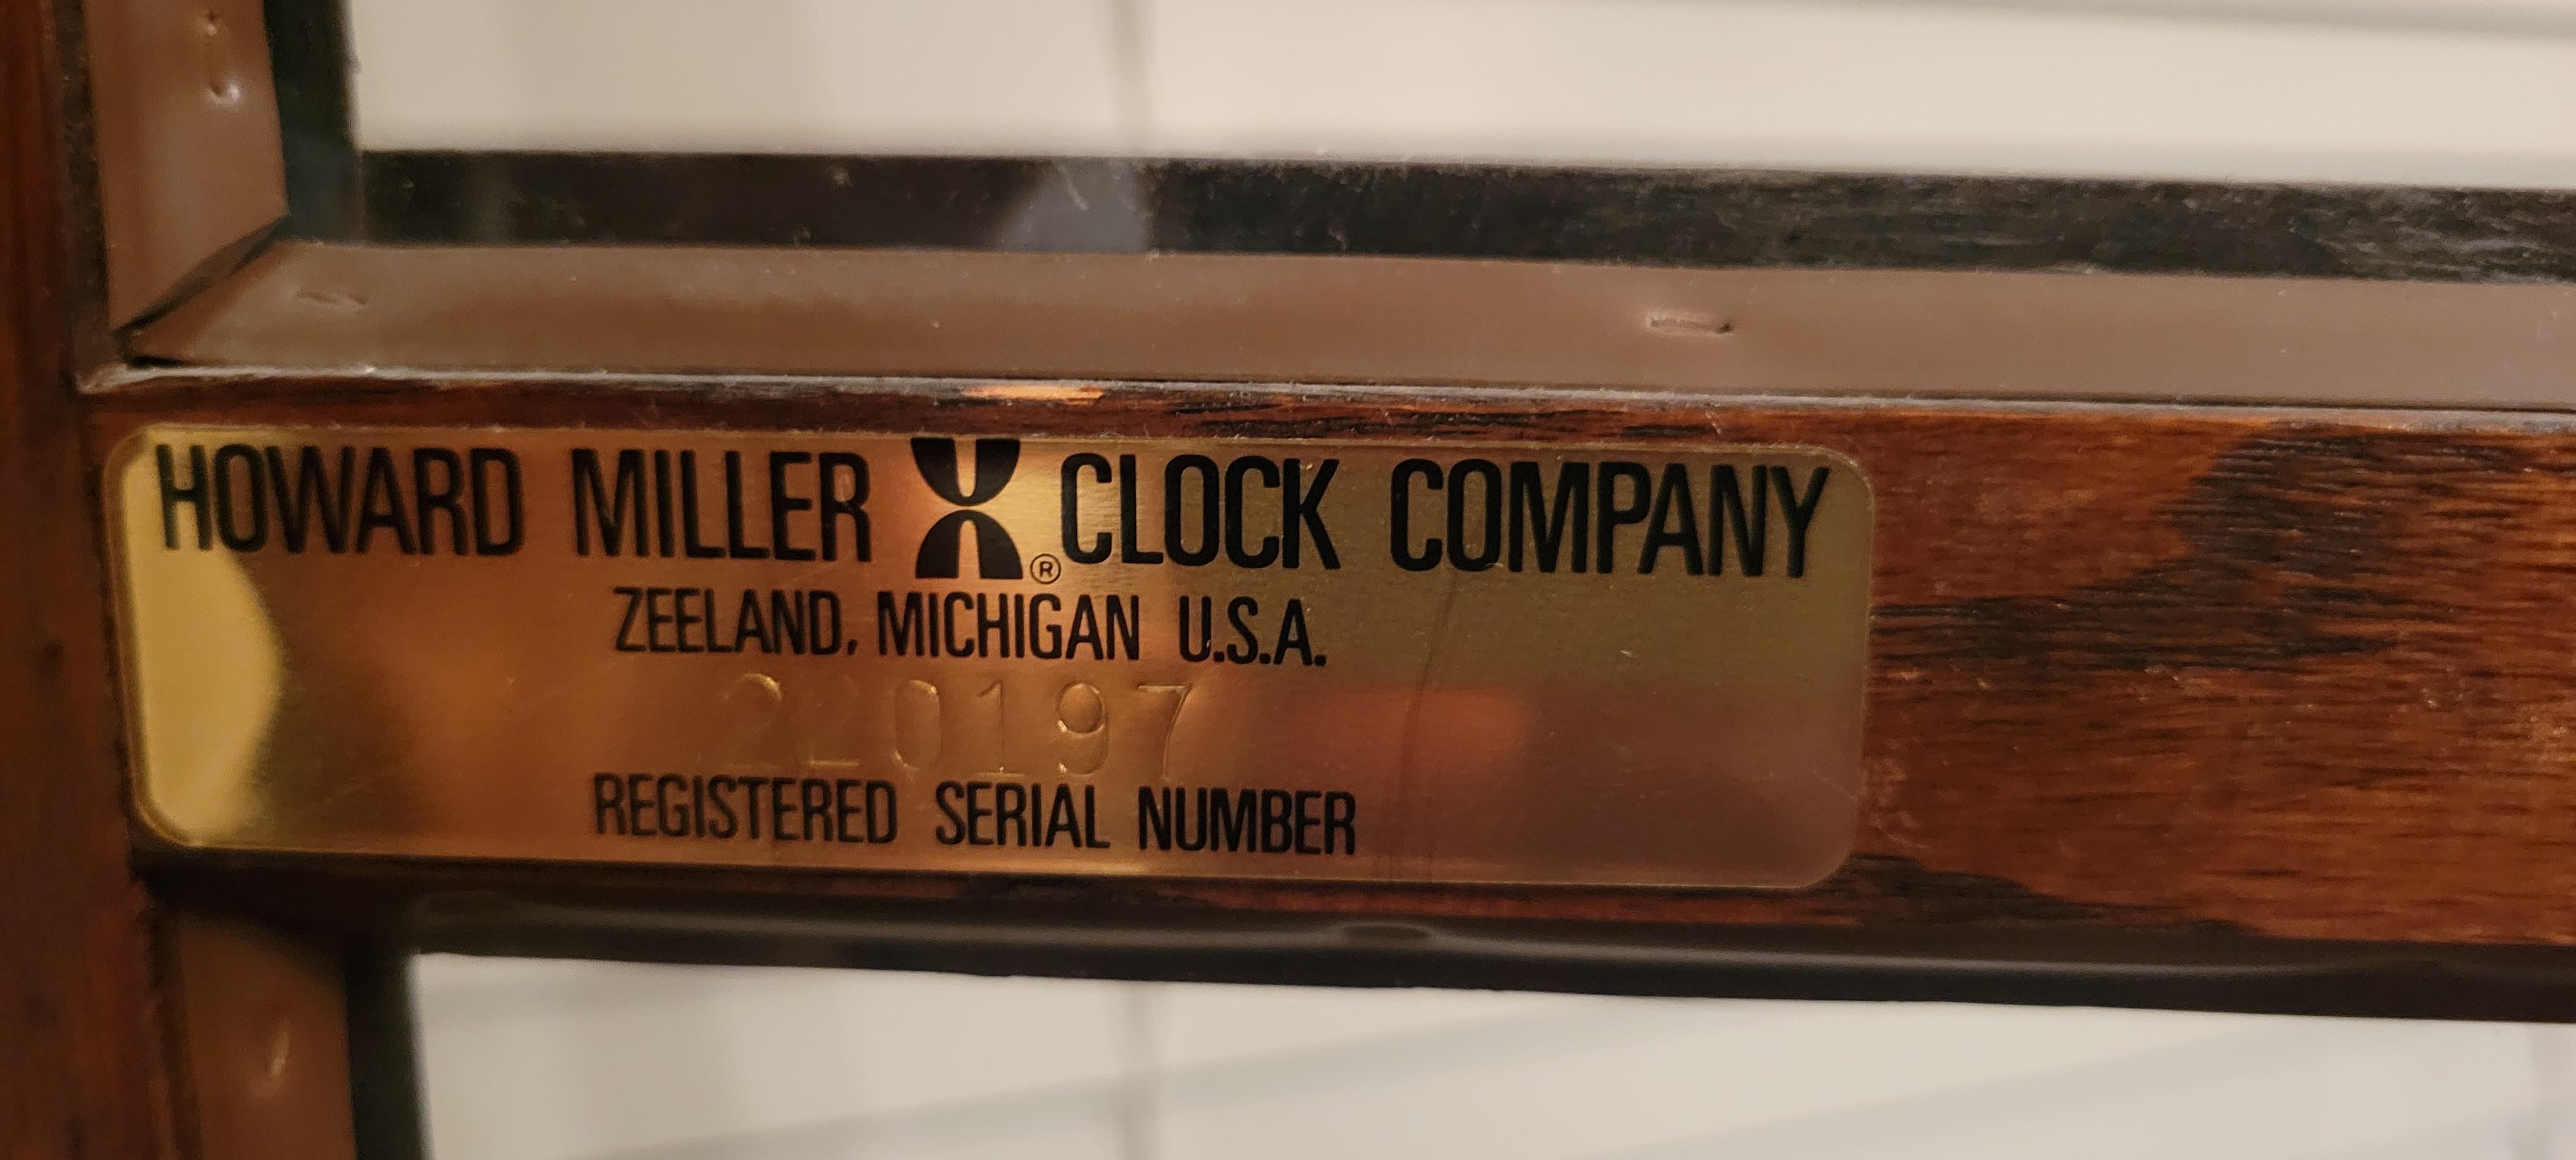 Howard Miller Grandfather clock. It works well and has a beautiful deep-tone Westminster chime.
Registration plate dates this clock to December of 1979.
The clock is 77